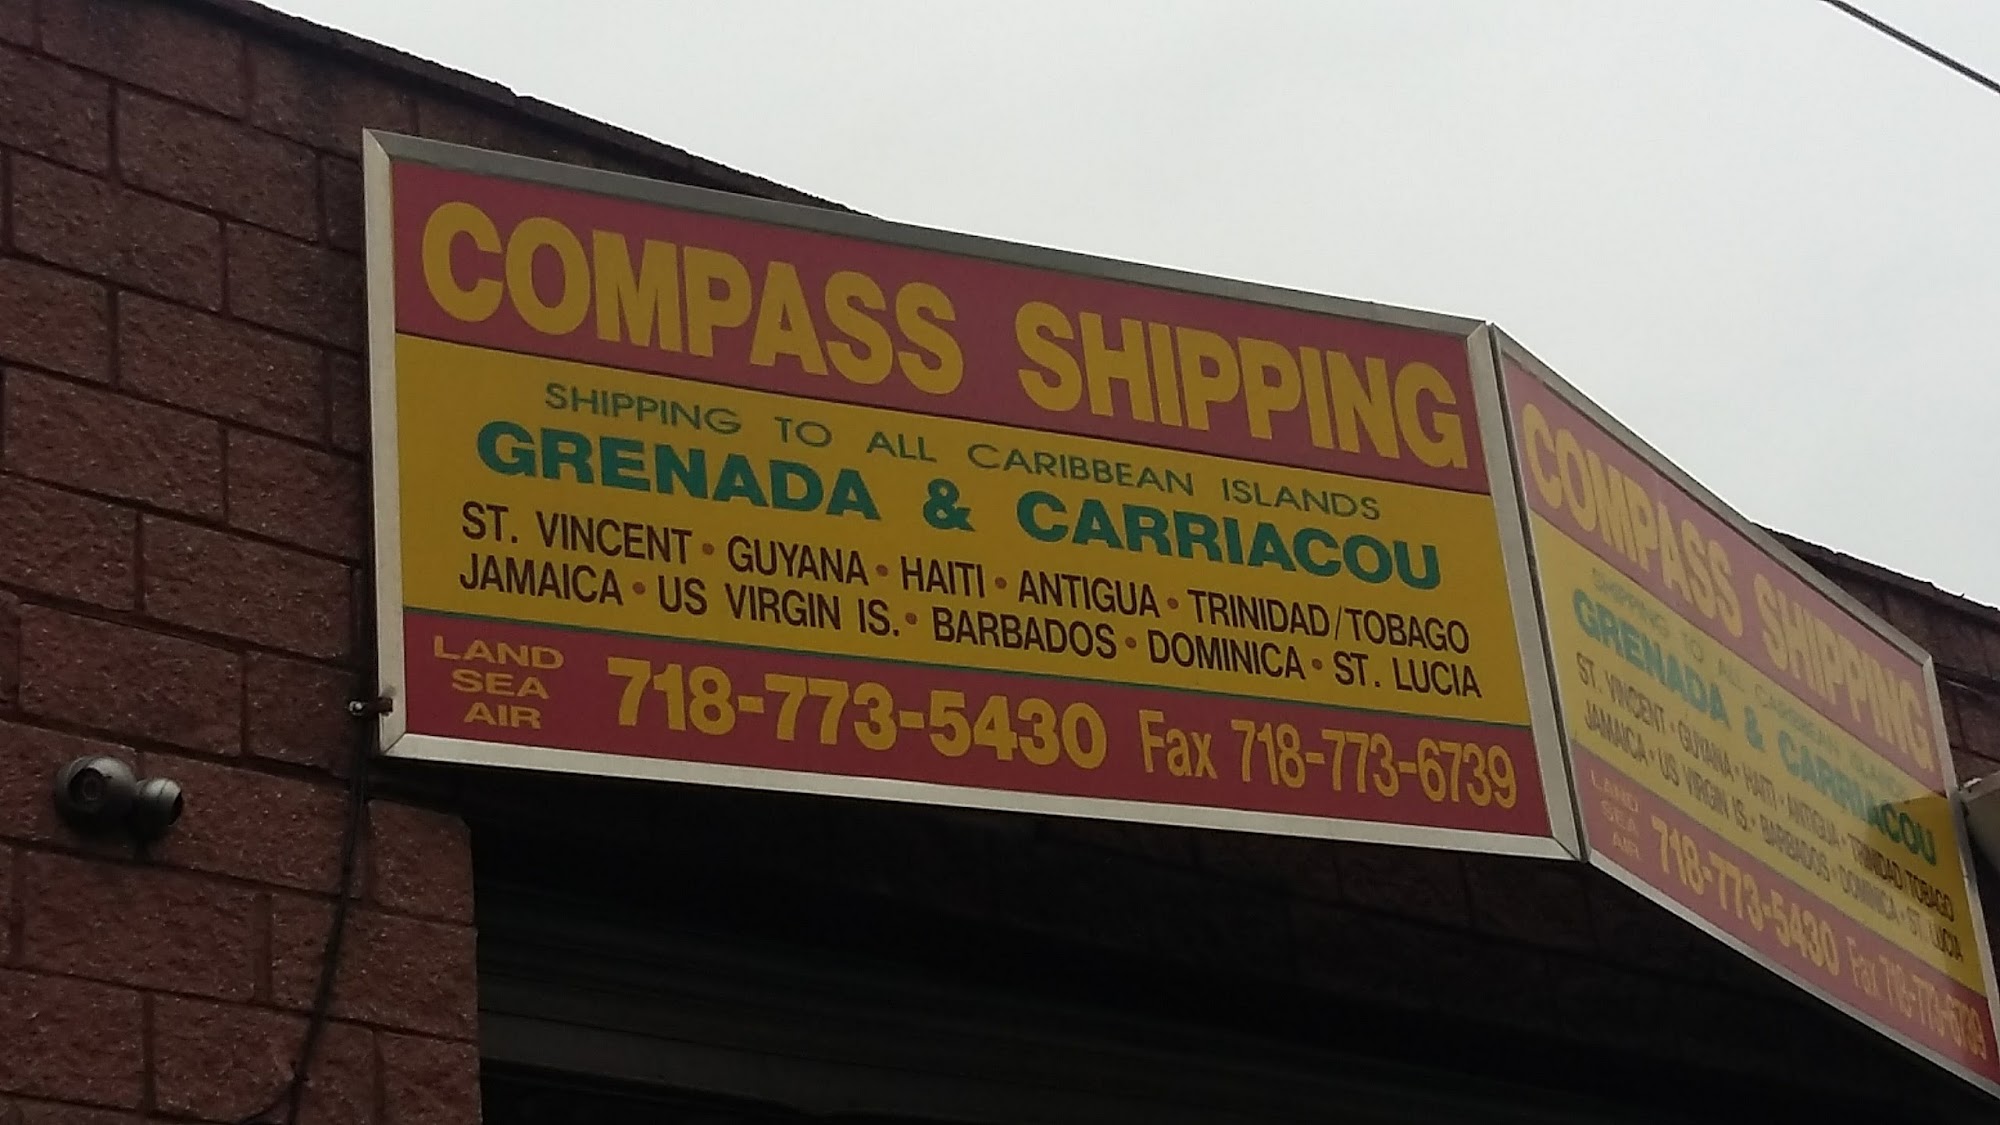 Compass Shipping Corporation